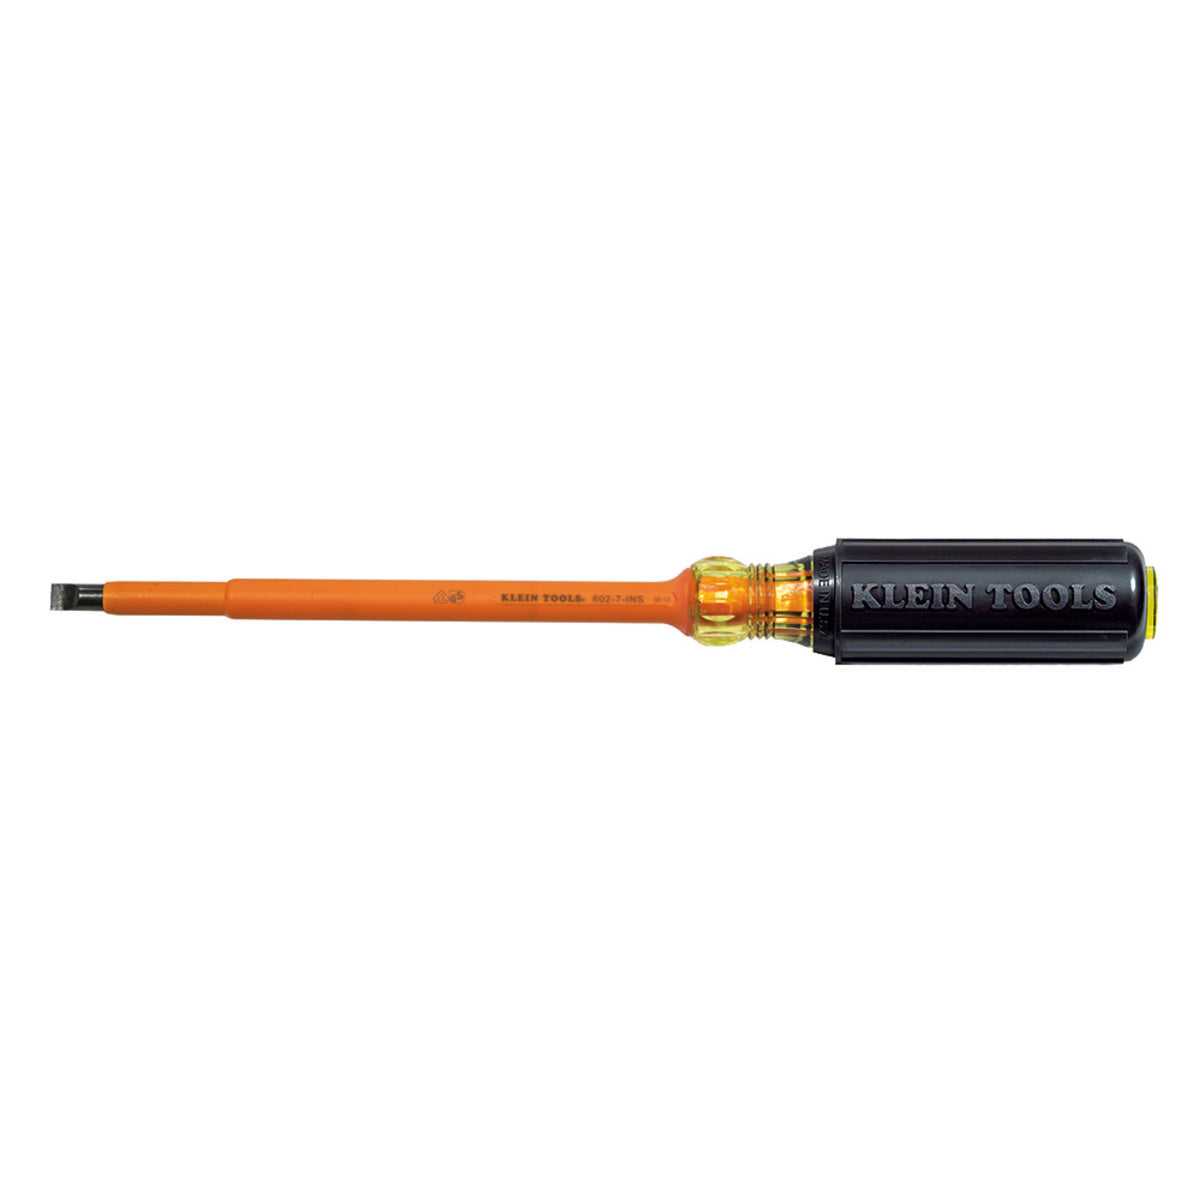 Klein Tools 12 3/8" Silver/Yellow/Black Induction Hardened Steel Screwdriver With High-Dielectric Plastic Handle